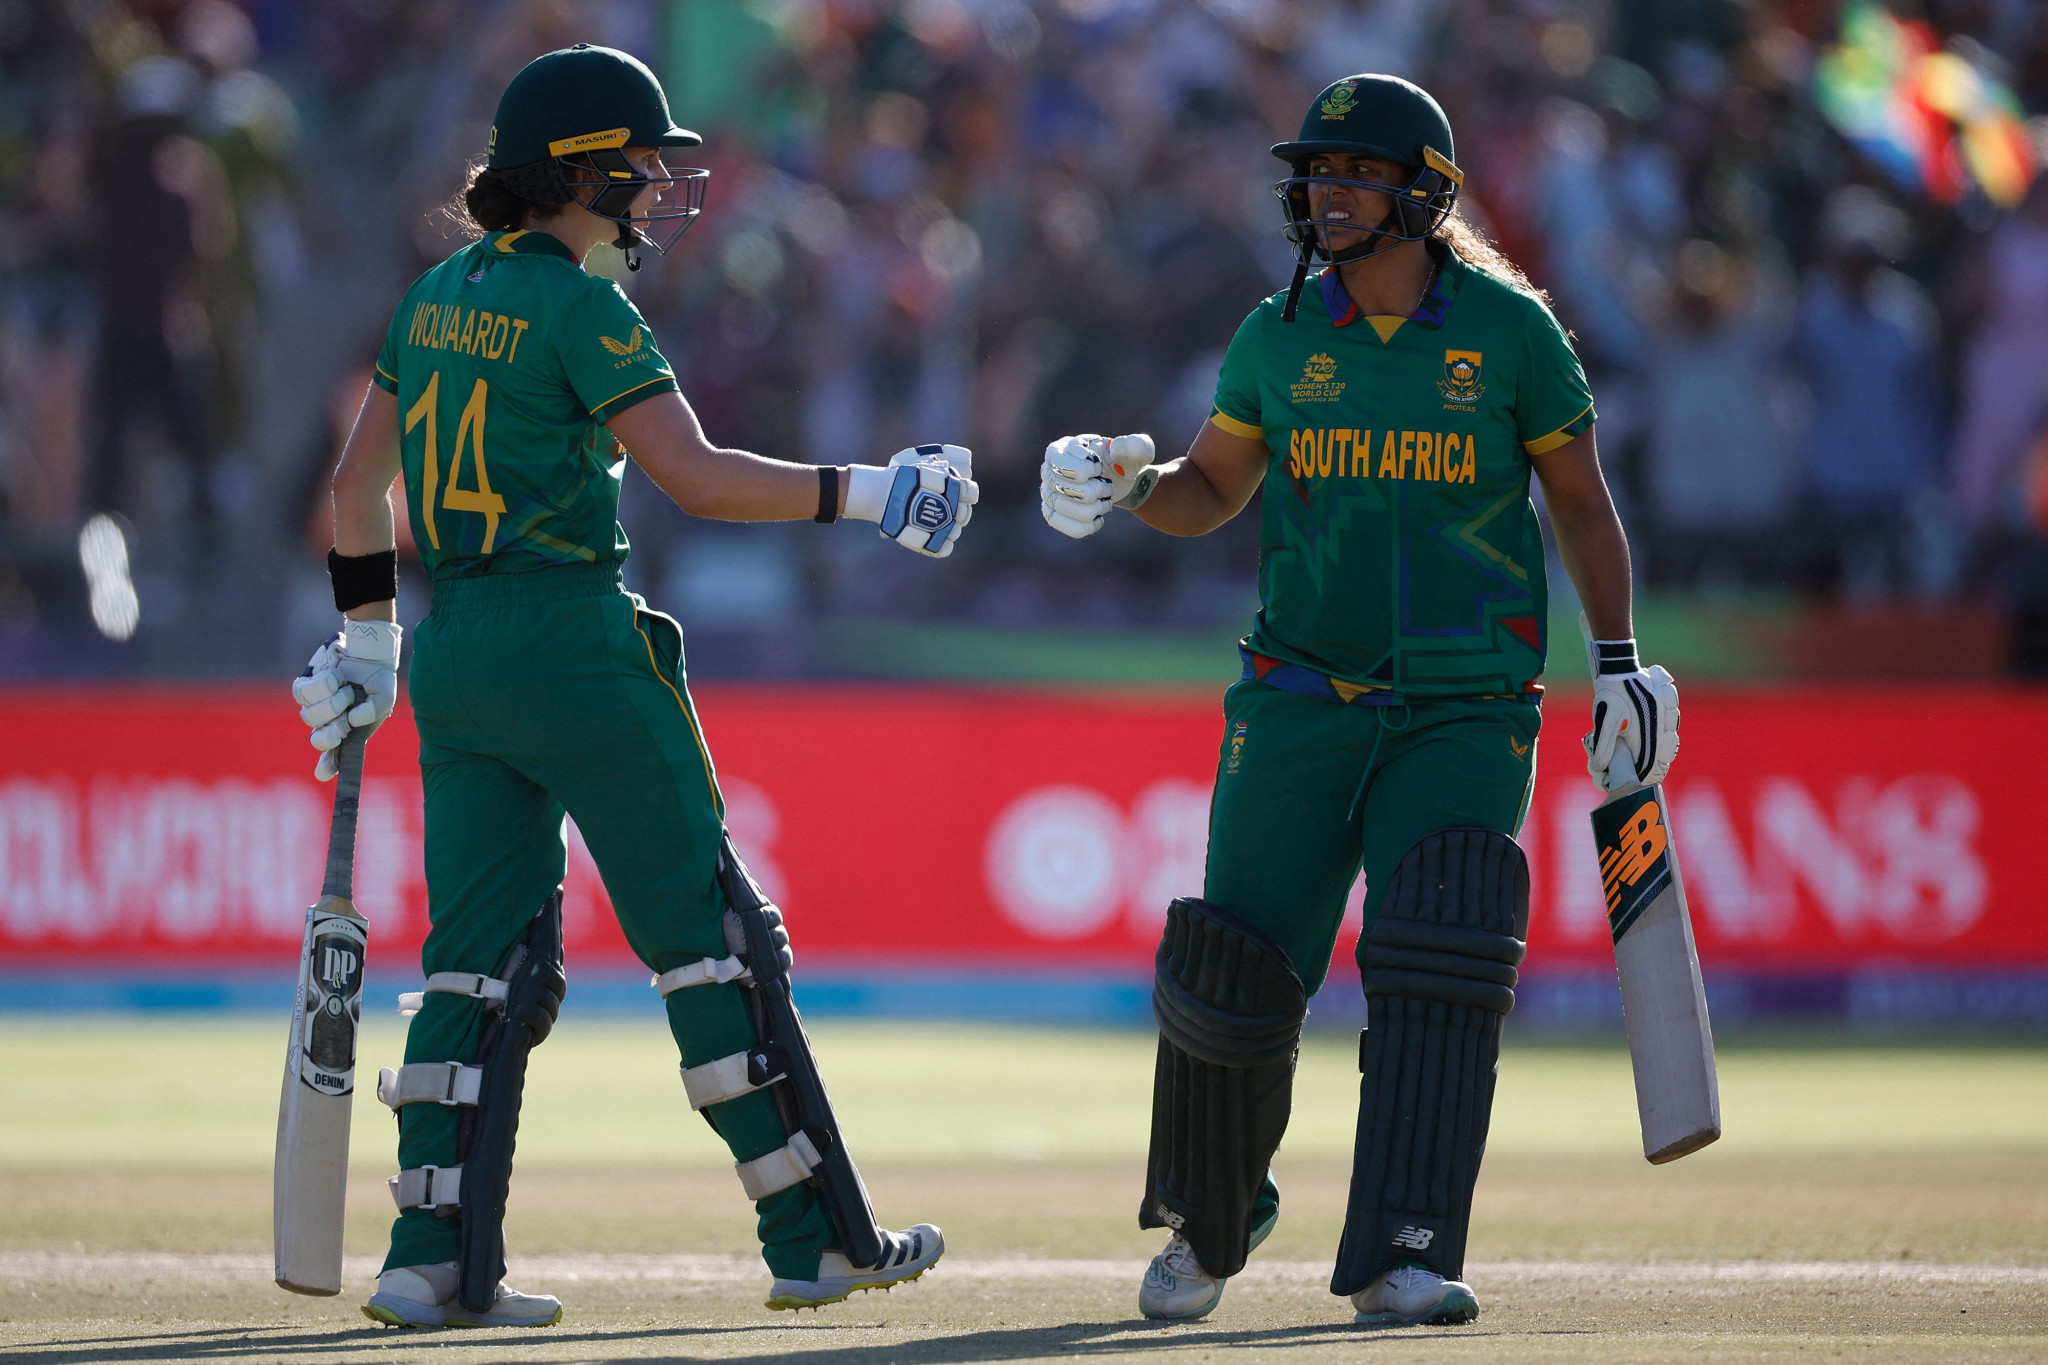 South Africa hosted the Women's T20 World Cup in what has proved to be a catalytic year for women's sport in the country ©Getty Images